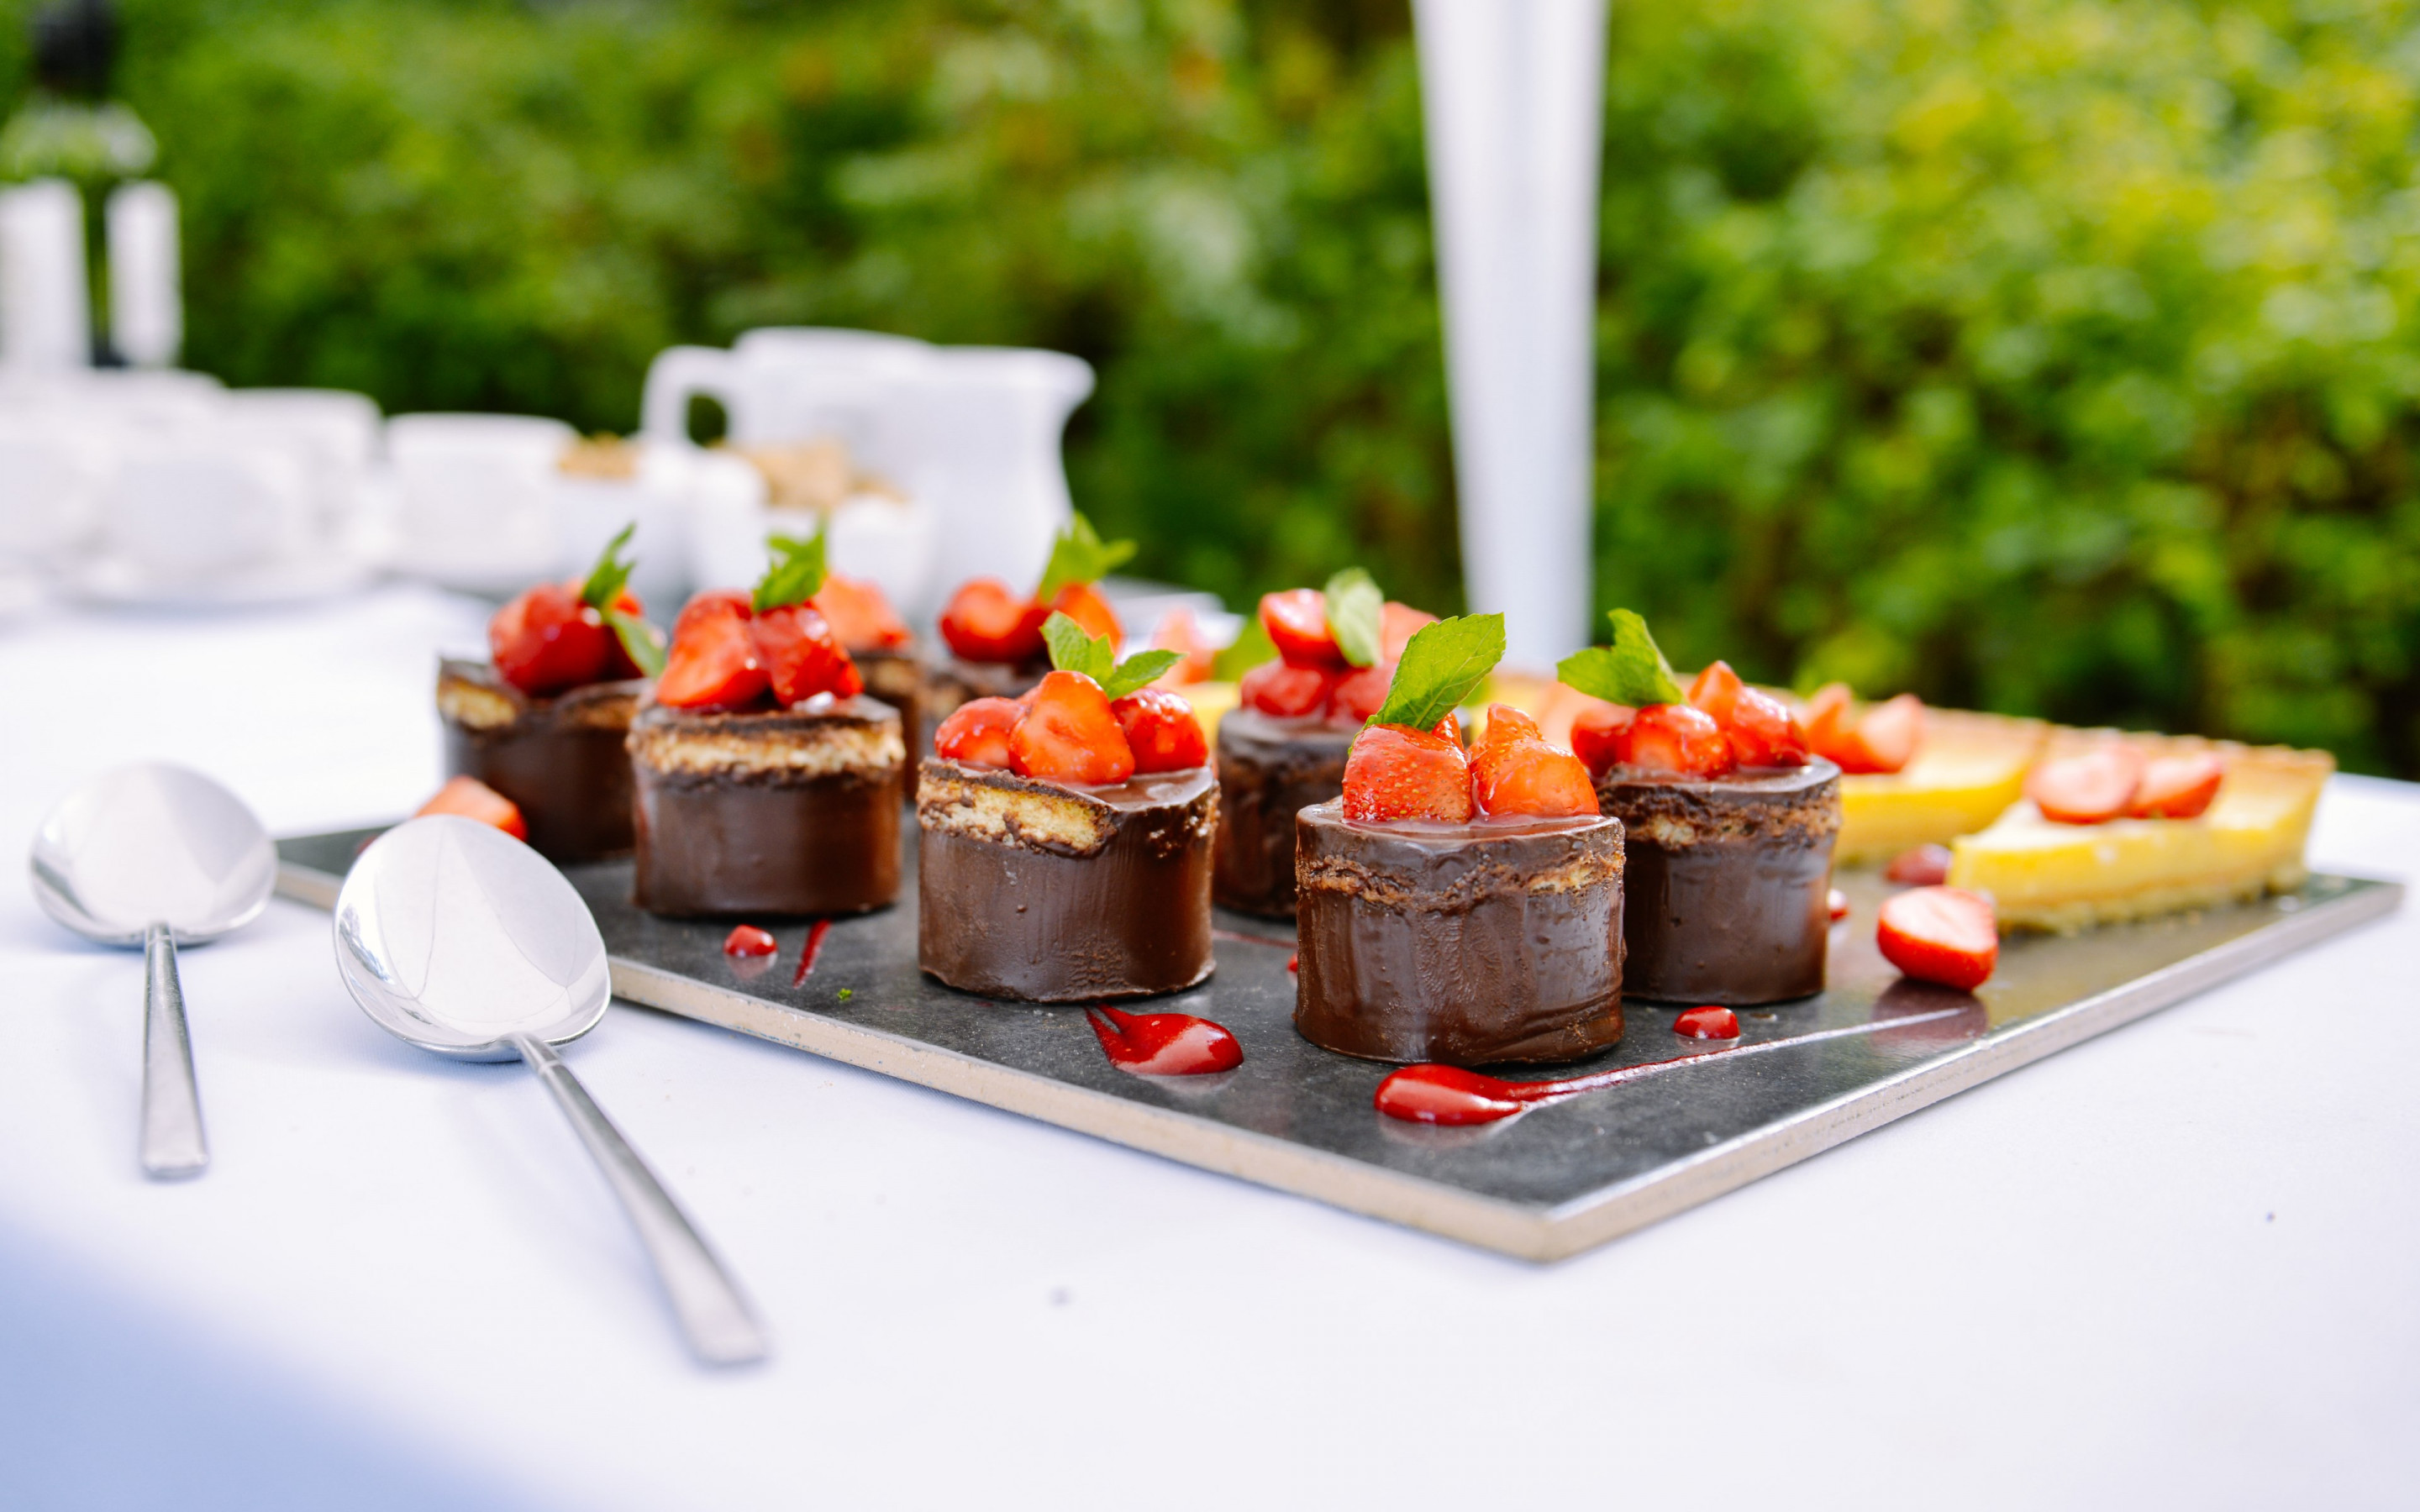 Chocolate cakes with strawberries wallpaper 2880x1800